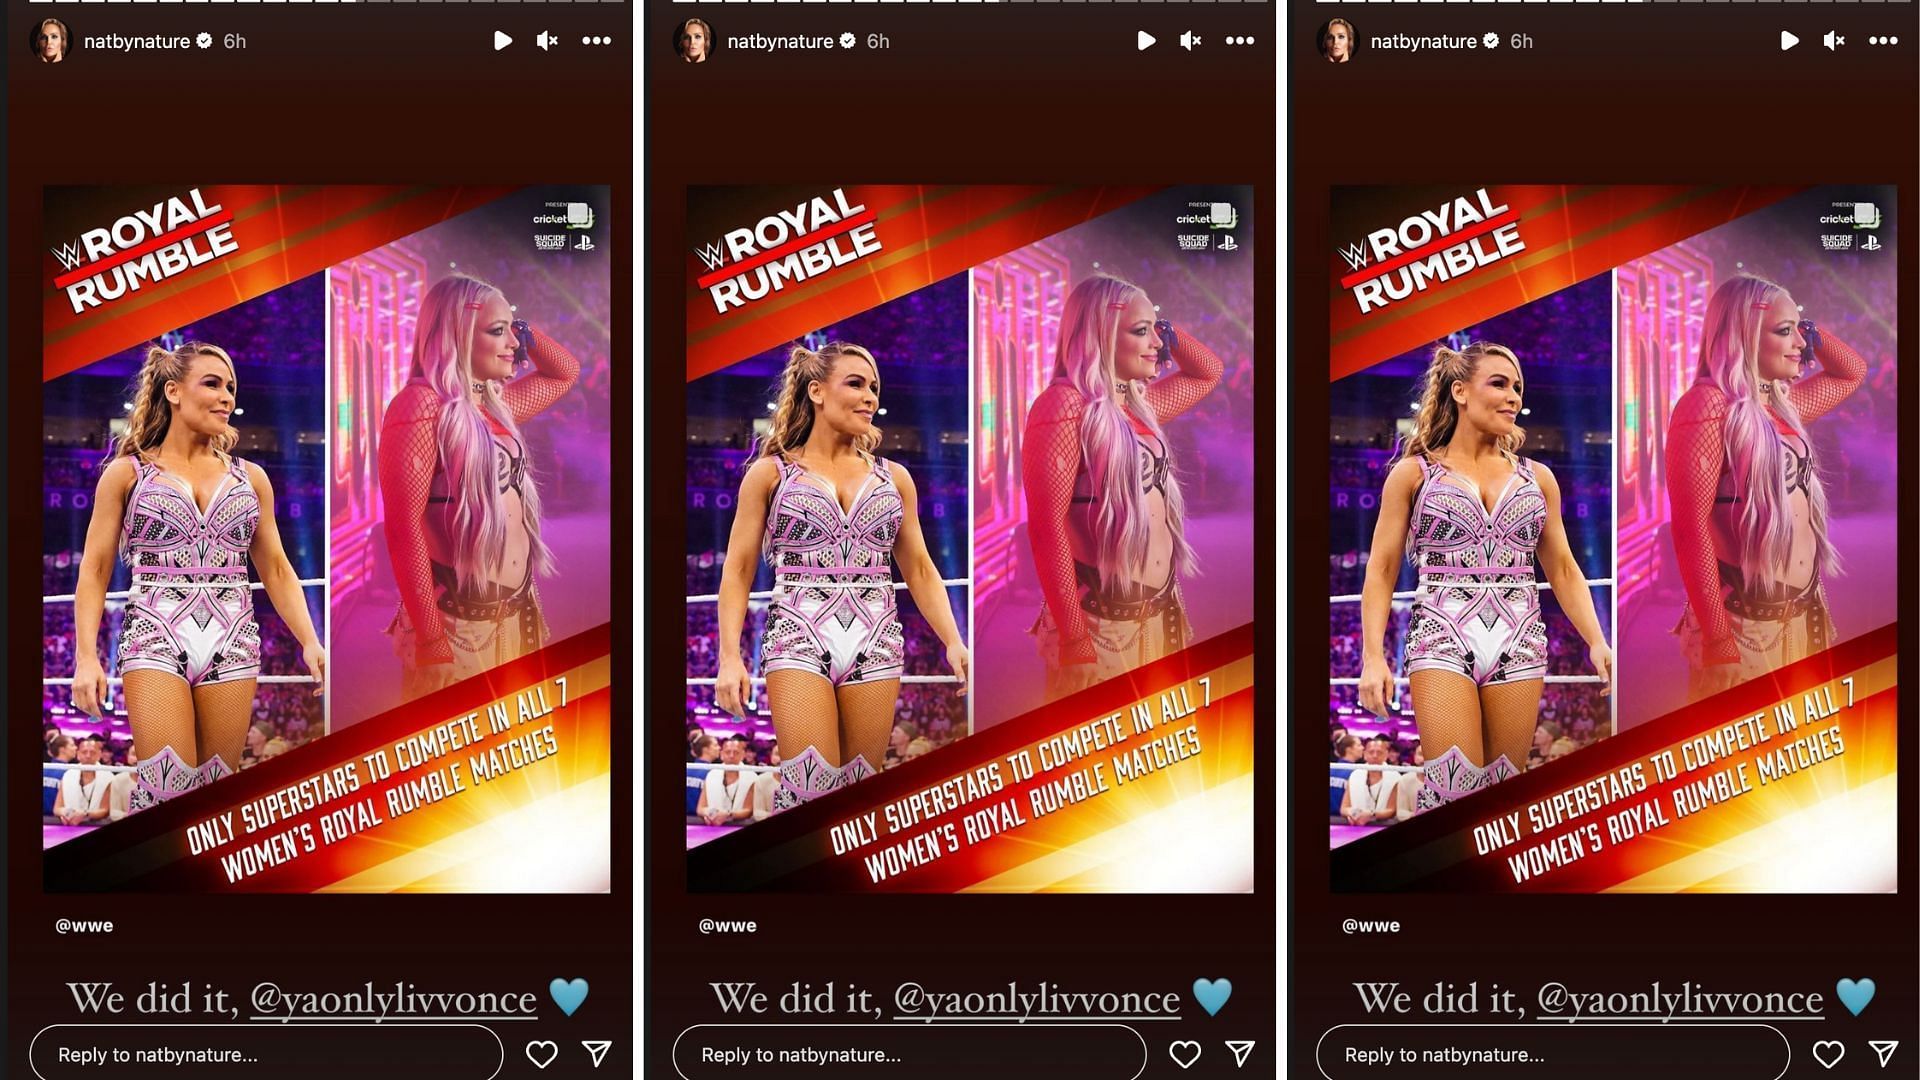 Natalya reacts to making history on Instagram.